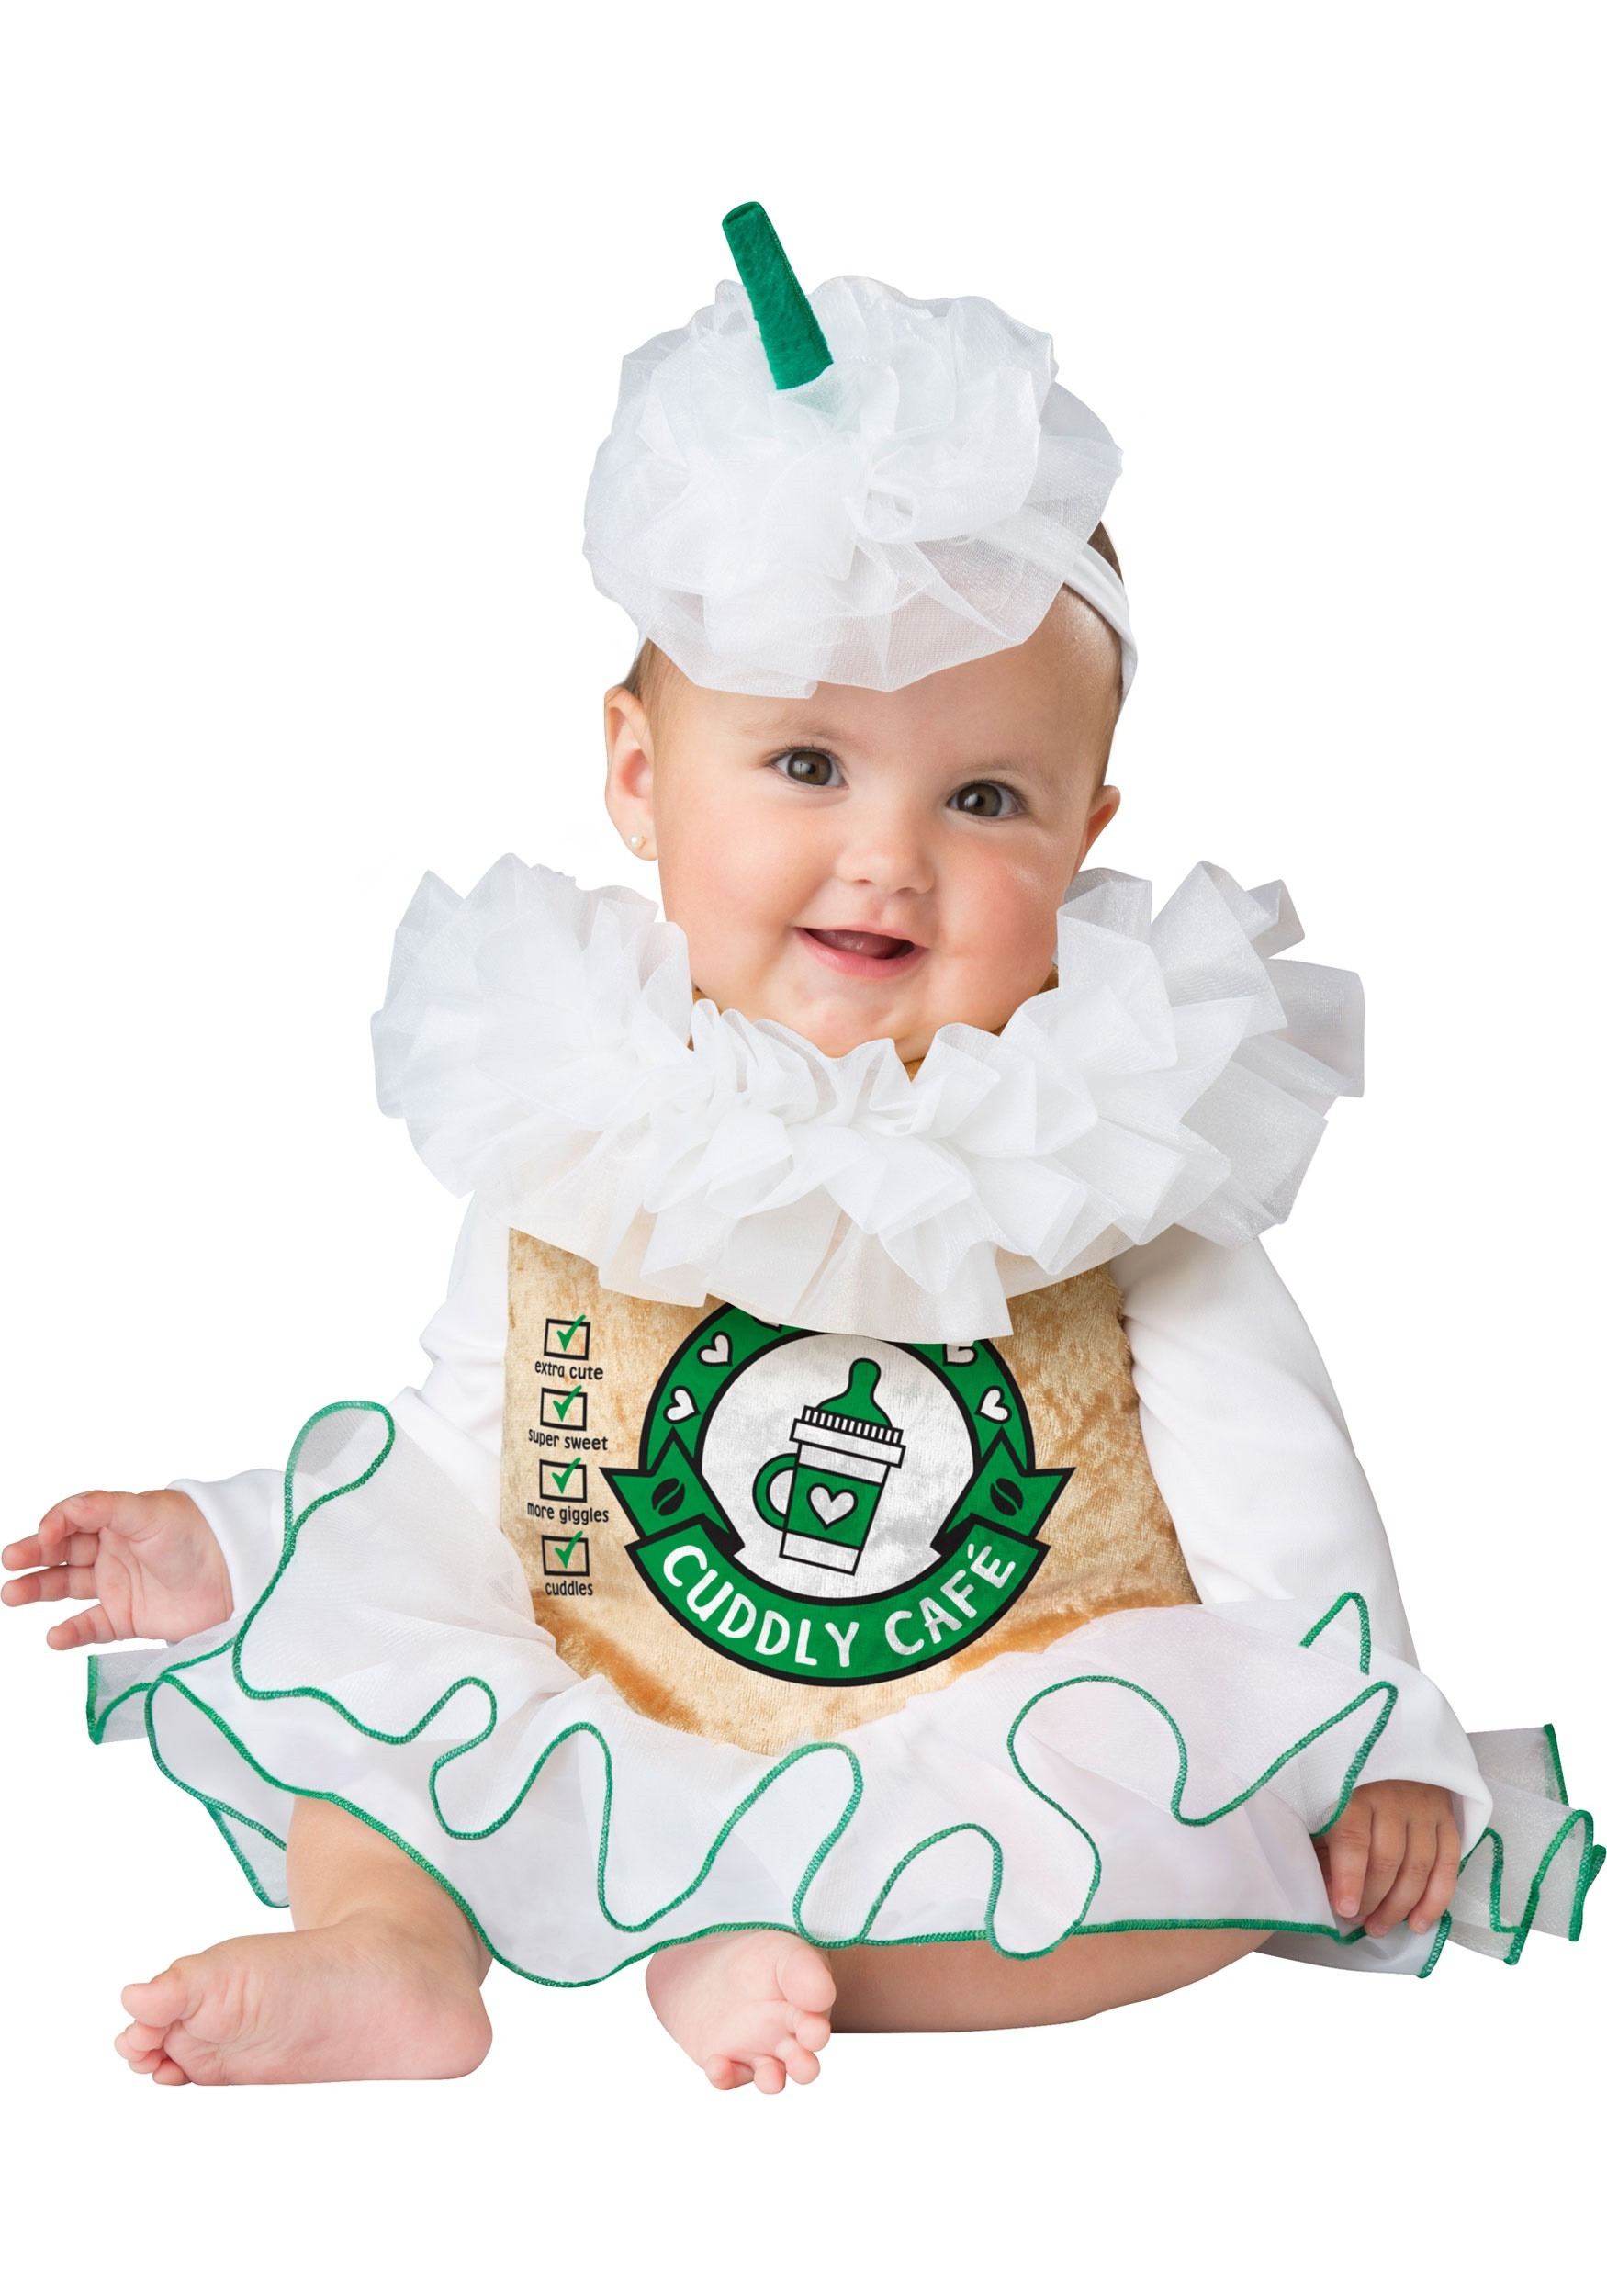 Diy Costumes For Baby
 Cuddly Cappuccino Costume for Infants